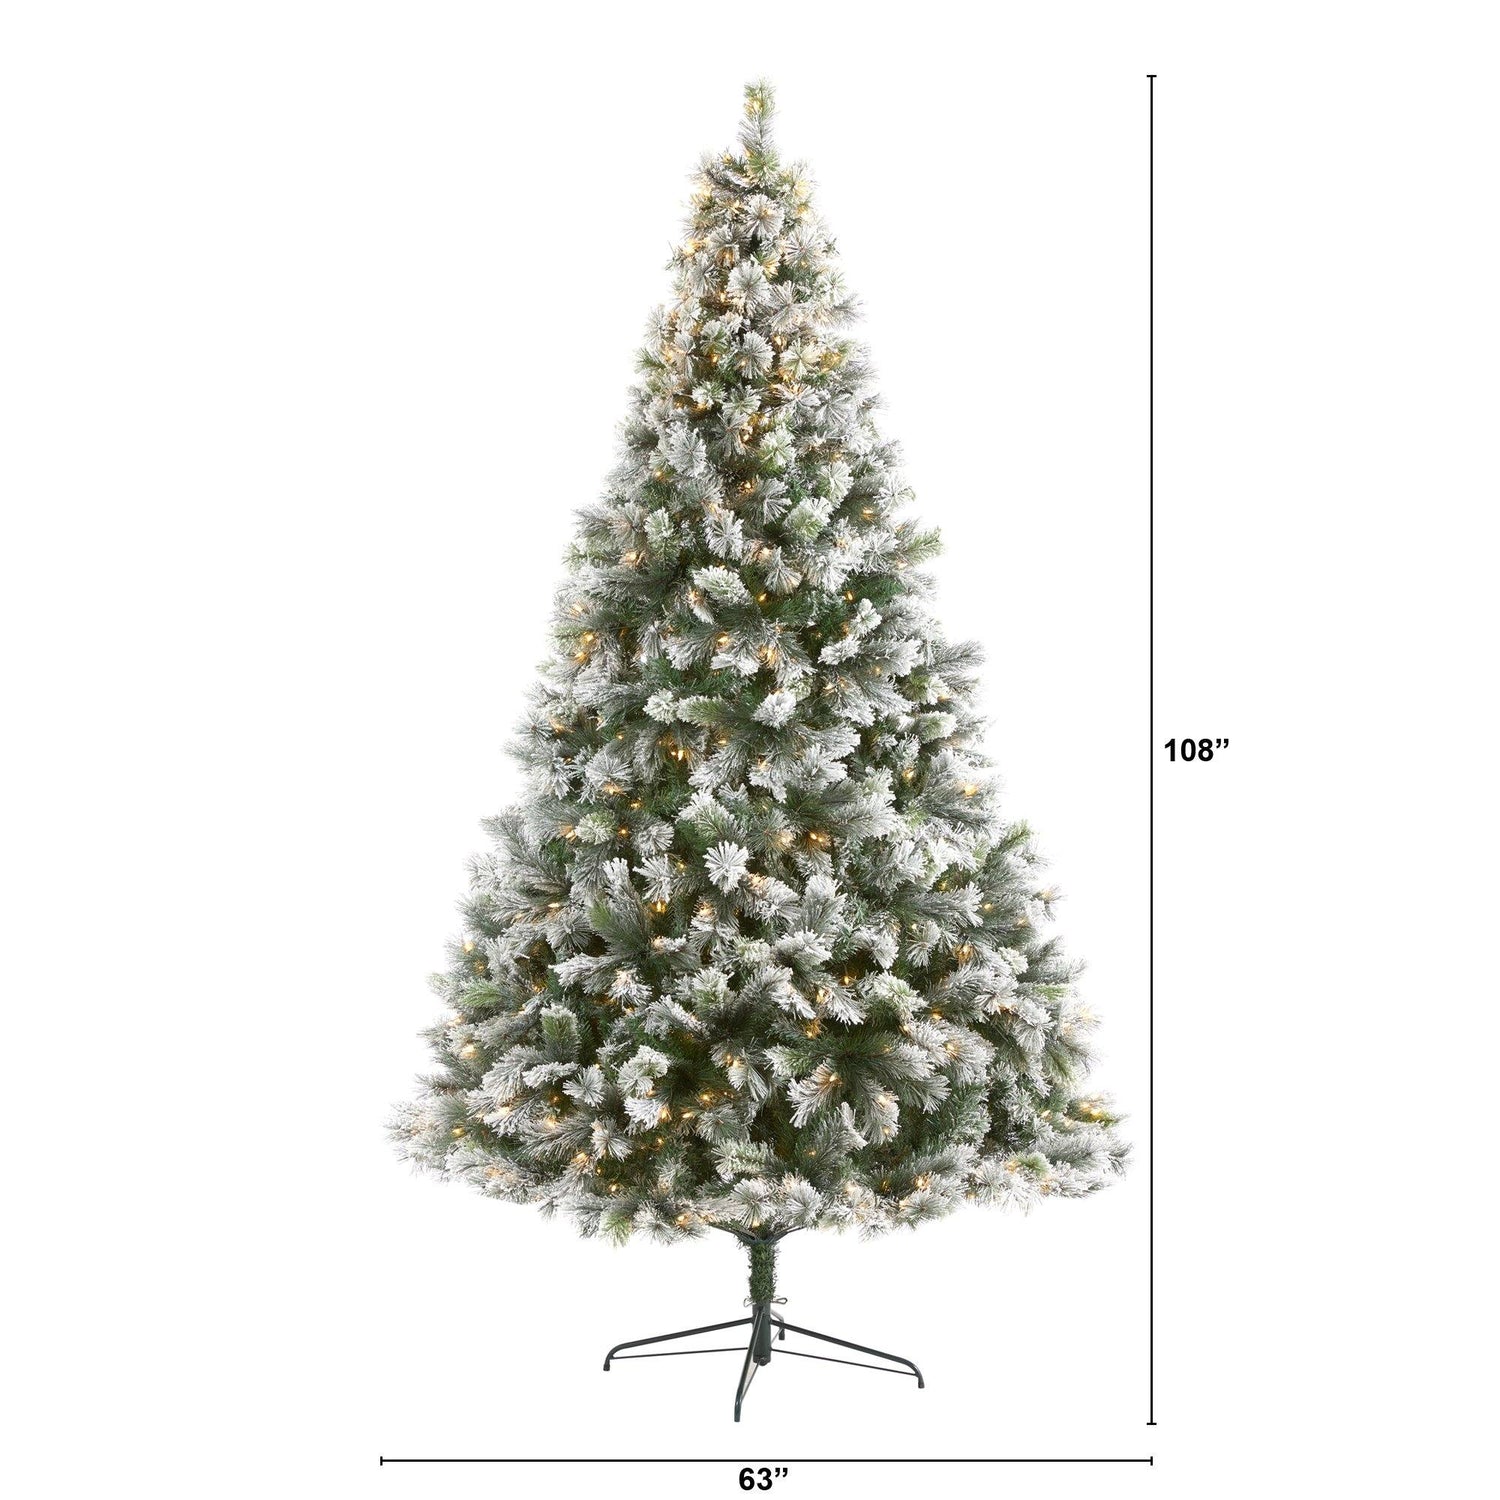 https://cdn.shopify.com/s/files/1/0108/9460/6436/products/artificial-9-flocked-oregon-pine-artificial-christmas-tree-with-600-clear-lights-and-1580-bendable-branches-nearly-natural-264703.jpg?v=1595283609&width=1500